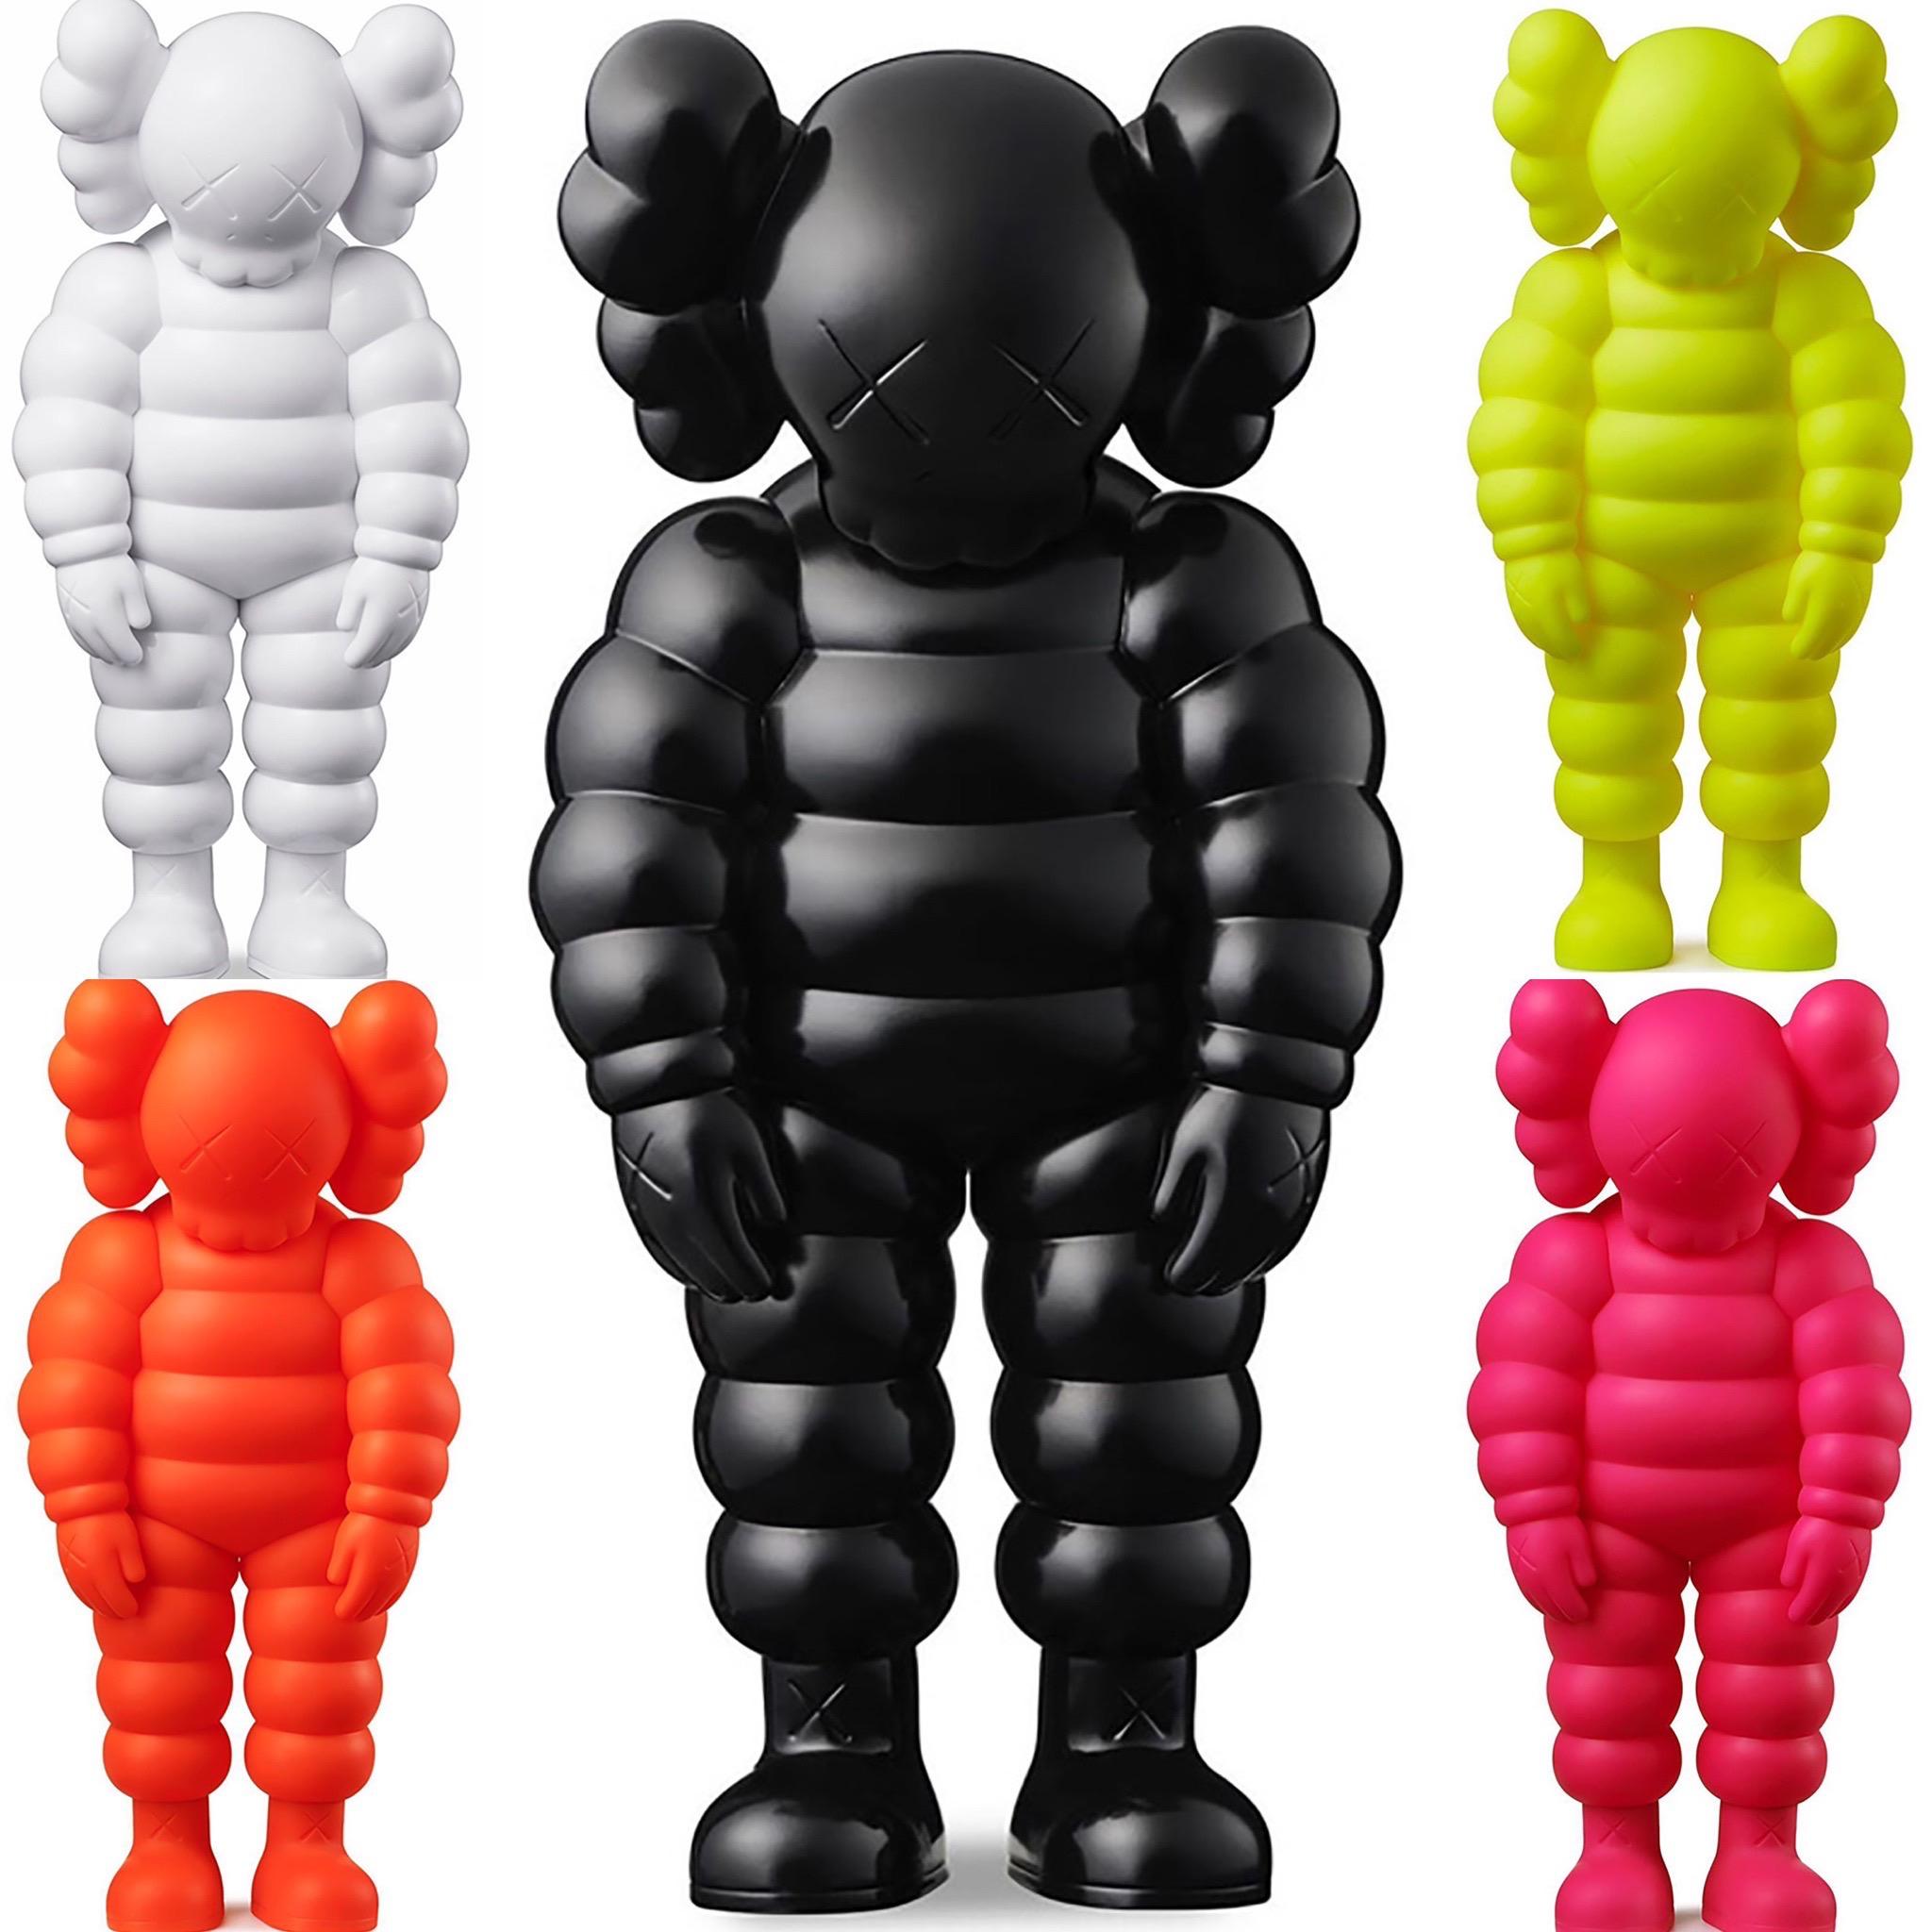 KAWS WHAT PARTY, Complete Set of 5:
5 individual KAWS Companions featuring KAWS' CHUM character in a hunched position. Published to commemorate the debut of KAWS’ larger scale sculptural version of same at K11 Musea Hong Kong & The Brooklyn Museum